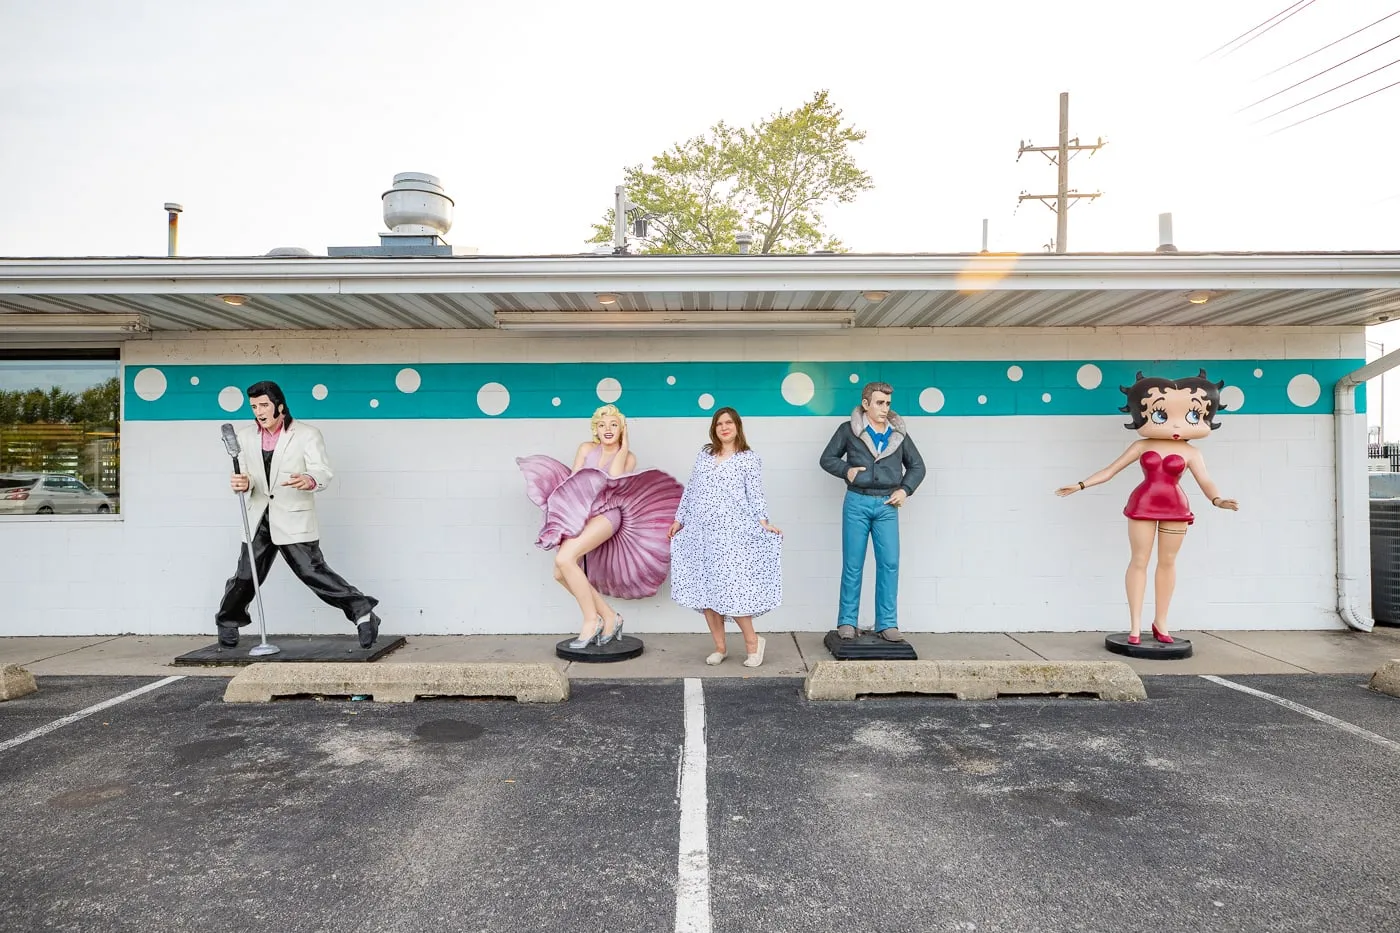 Statues of Elvis, Marilyn Monroe, James Dean, and Betty Boop at the Route 66 Polk-a-Dot Drive In in Braidwood, Illinois